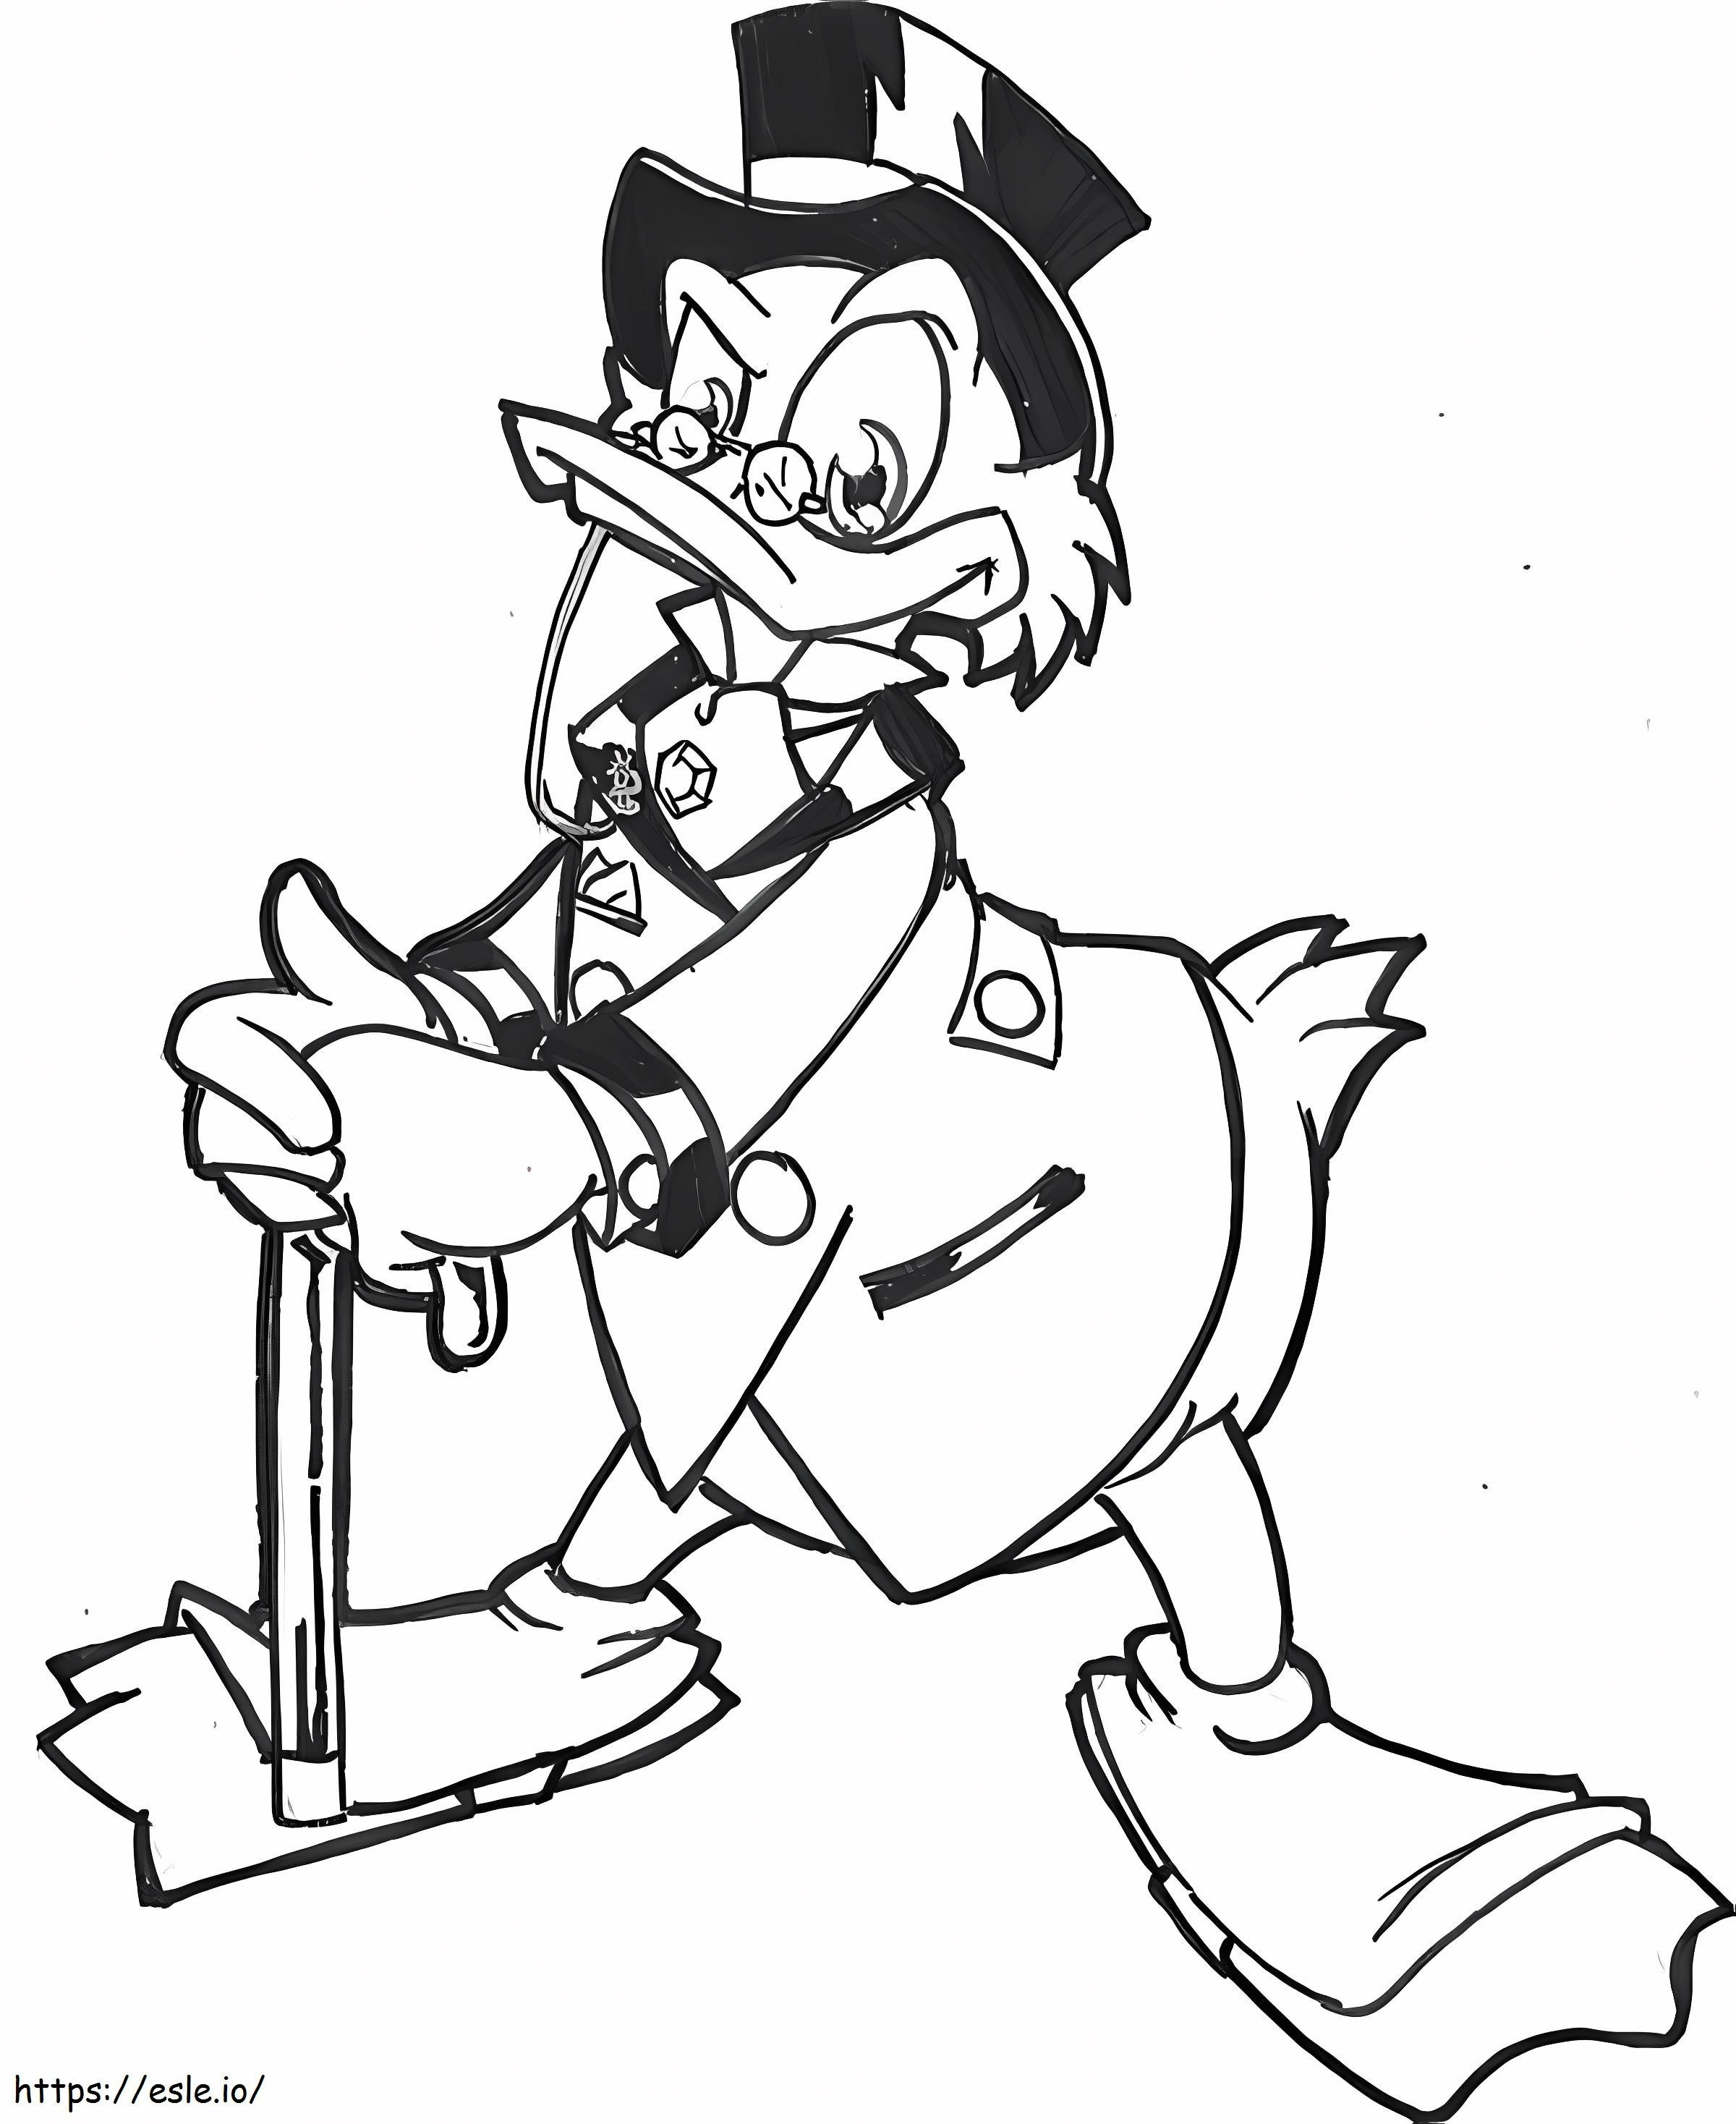 Cool Scrooge McDuck coloring page